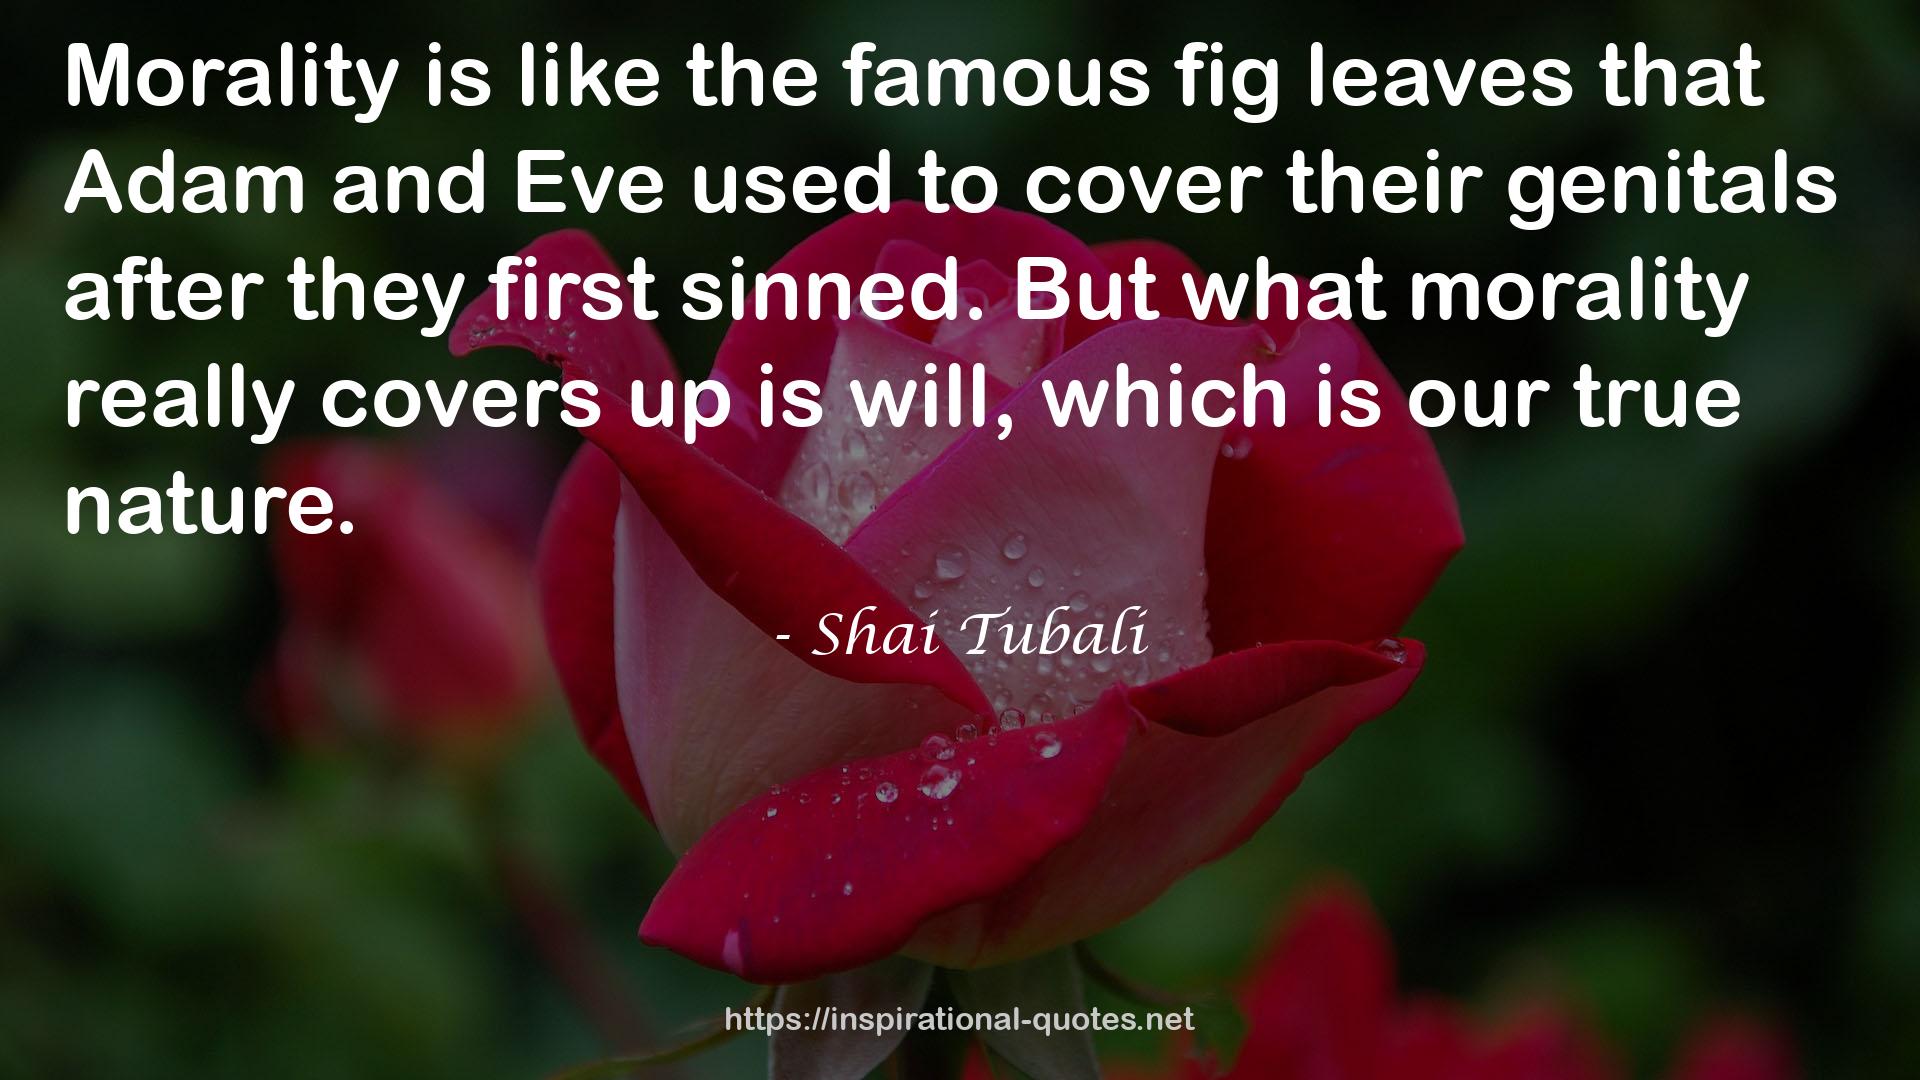 the famous fig leaves  QUOTES